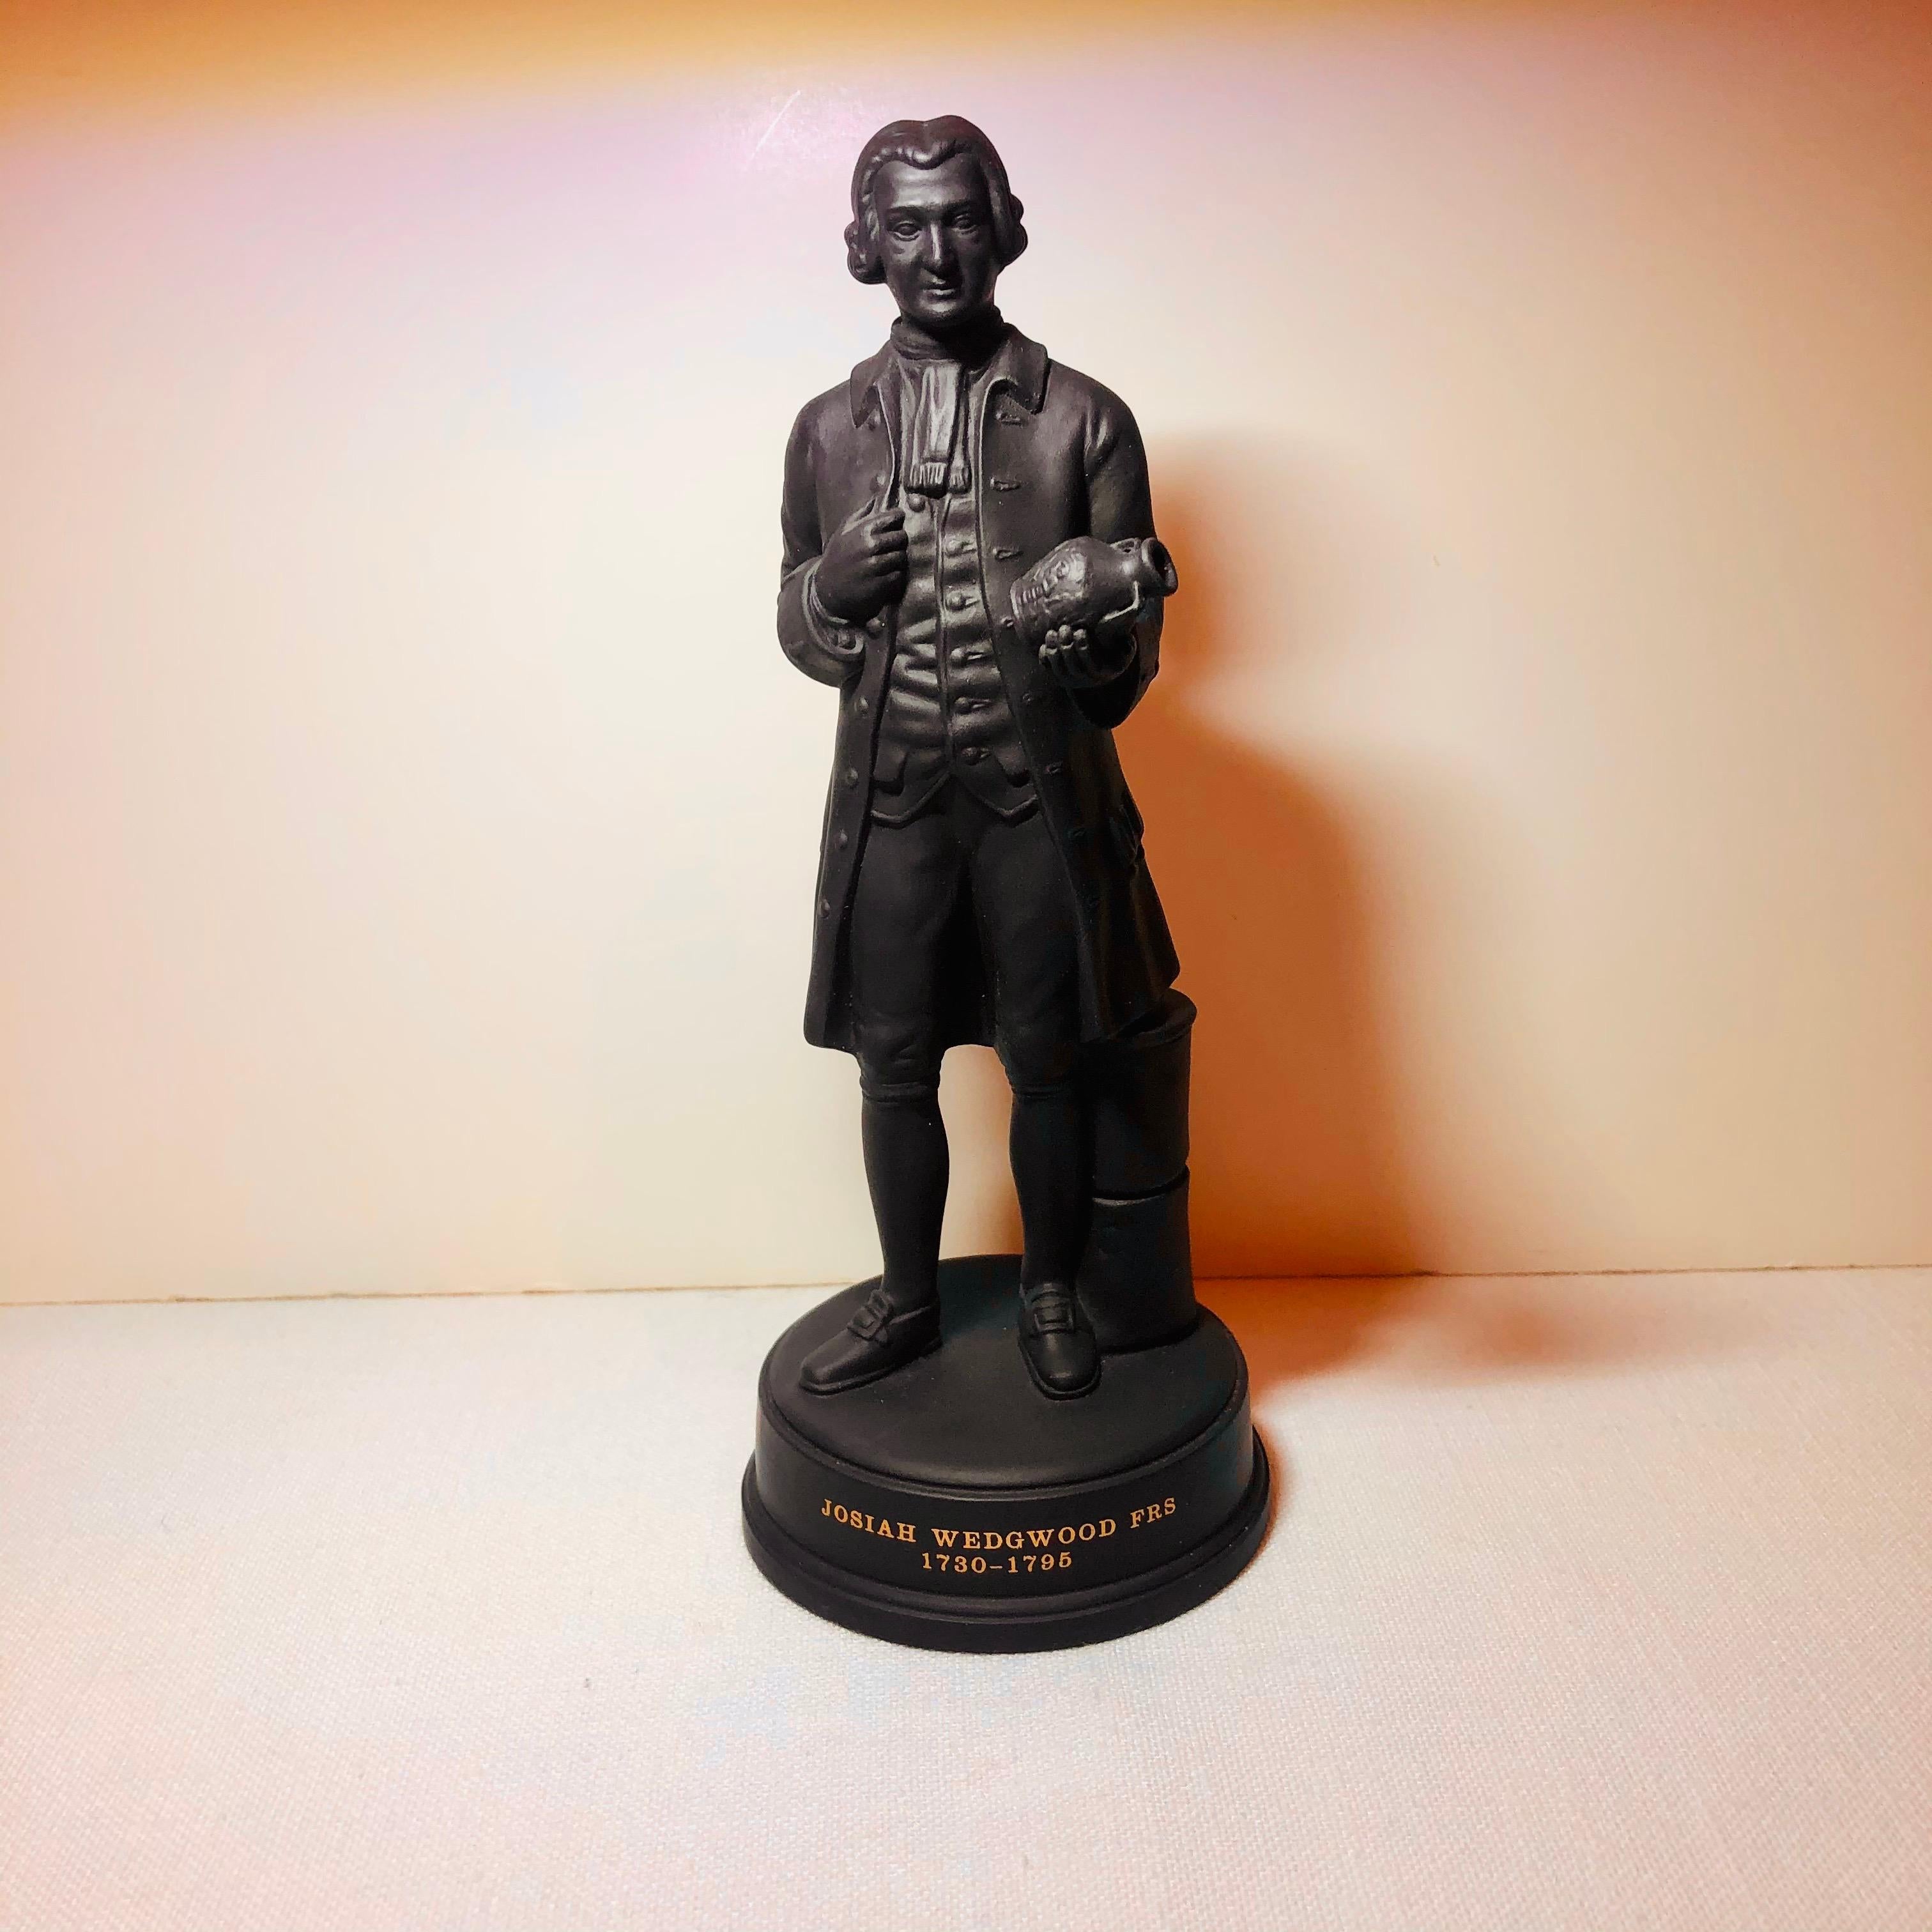 This is an important black basalt Wedgwood figure of Josiah Wedgwood, who is the founder of Wedgwood, holding his historic Portland vase, which was a proud work of art for Wedgwood. It is a beautifully modeled figure made at Wedgwood. It is 8.88